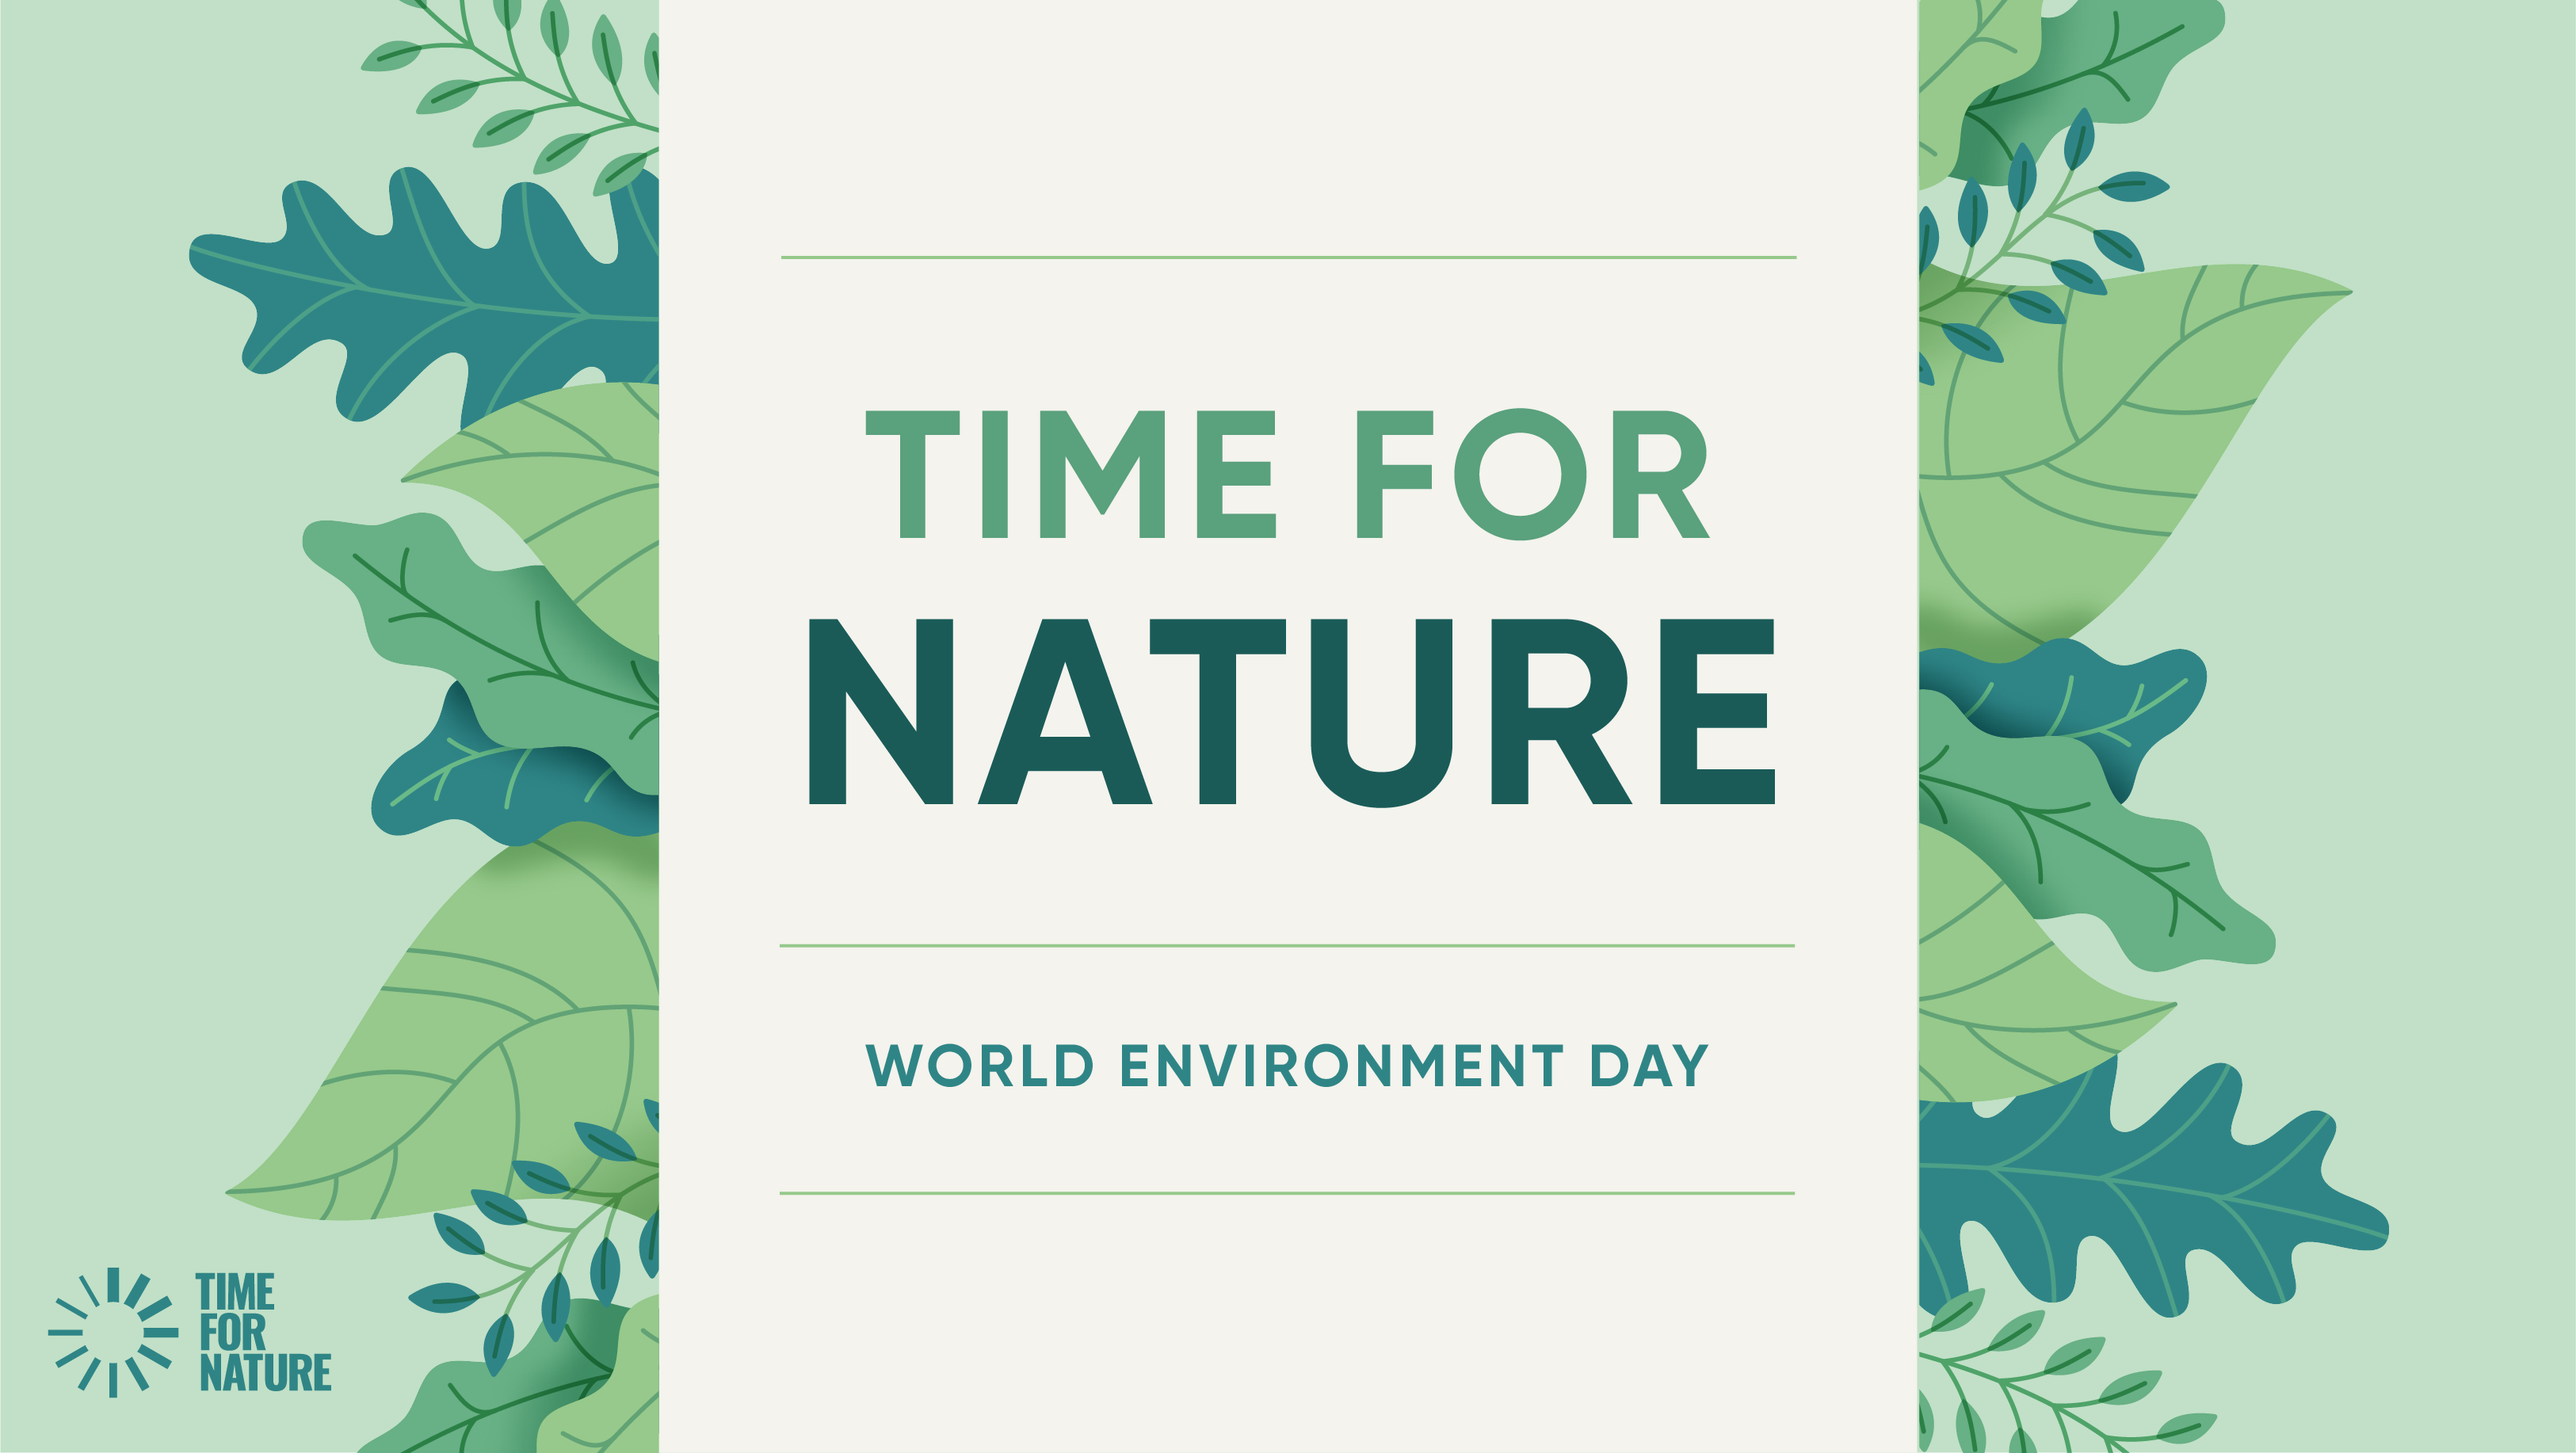 3 simple things companies should do to make more time for nature this 2020 World Environment Day